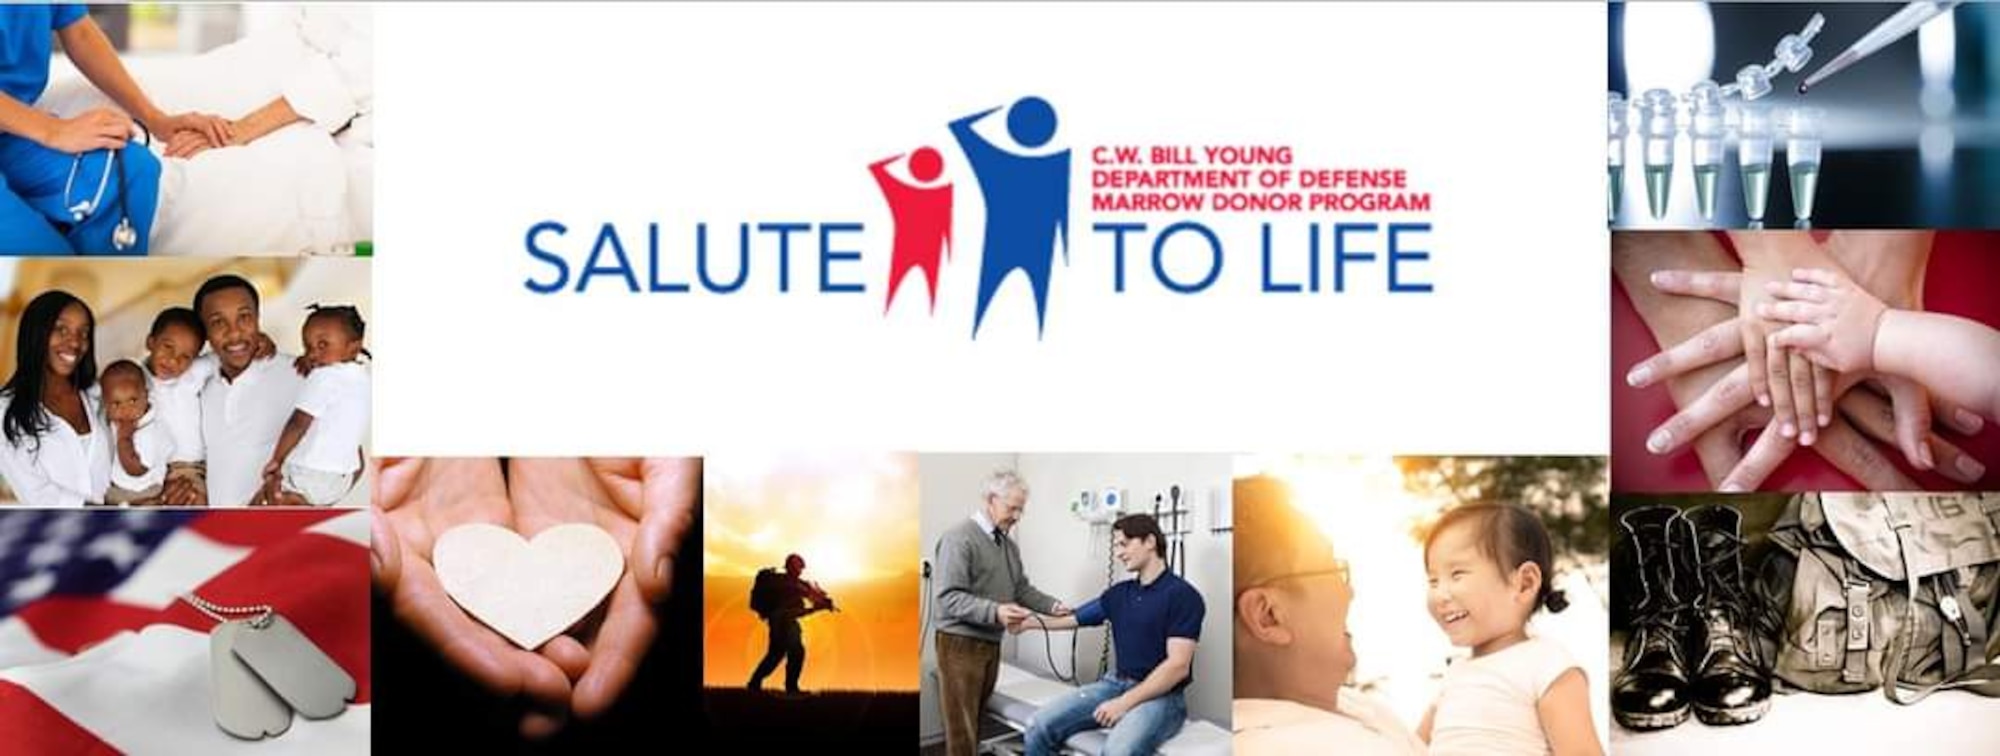 The C.W. Bill Young Department of Defense Marrow Donor Recruitment and Research Program, also known as Salute to Life, works with military personnel, their dependents, DoD civilian employees, Reservists, Coast Guard and National Guard members to facilitate marrow and stem cell donations. (Salute to Life Organization)